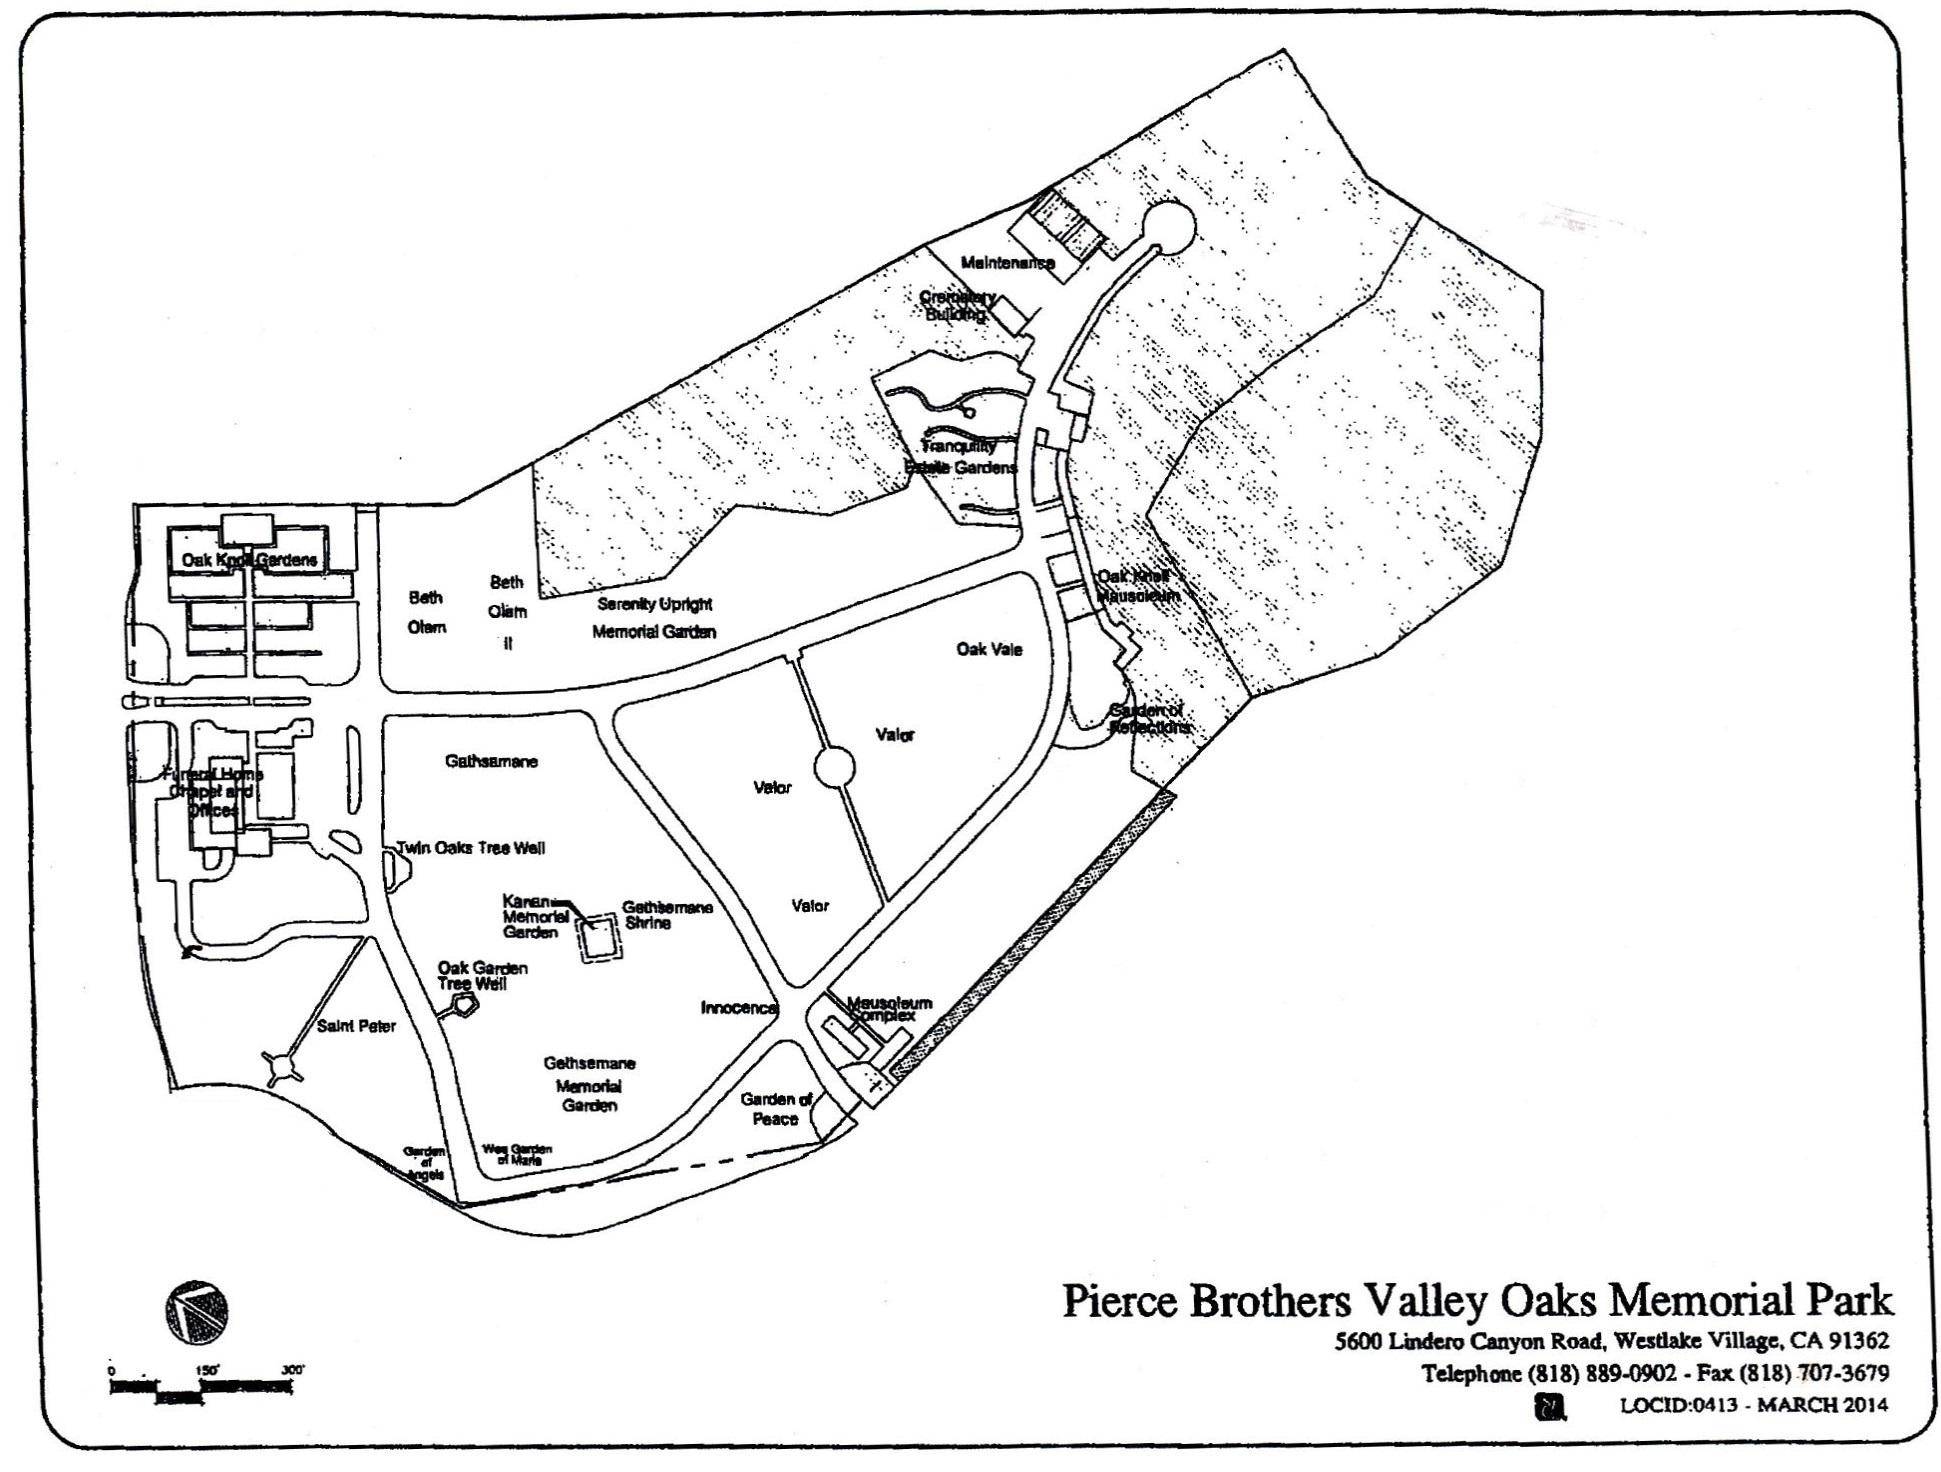 Map of Pierce Brothers Valley Oaks Memorial Park in Thousand Oaks, California